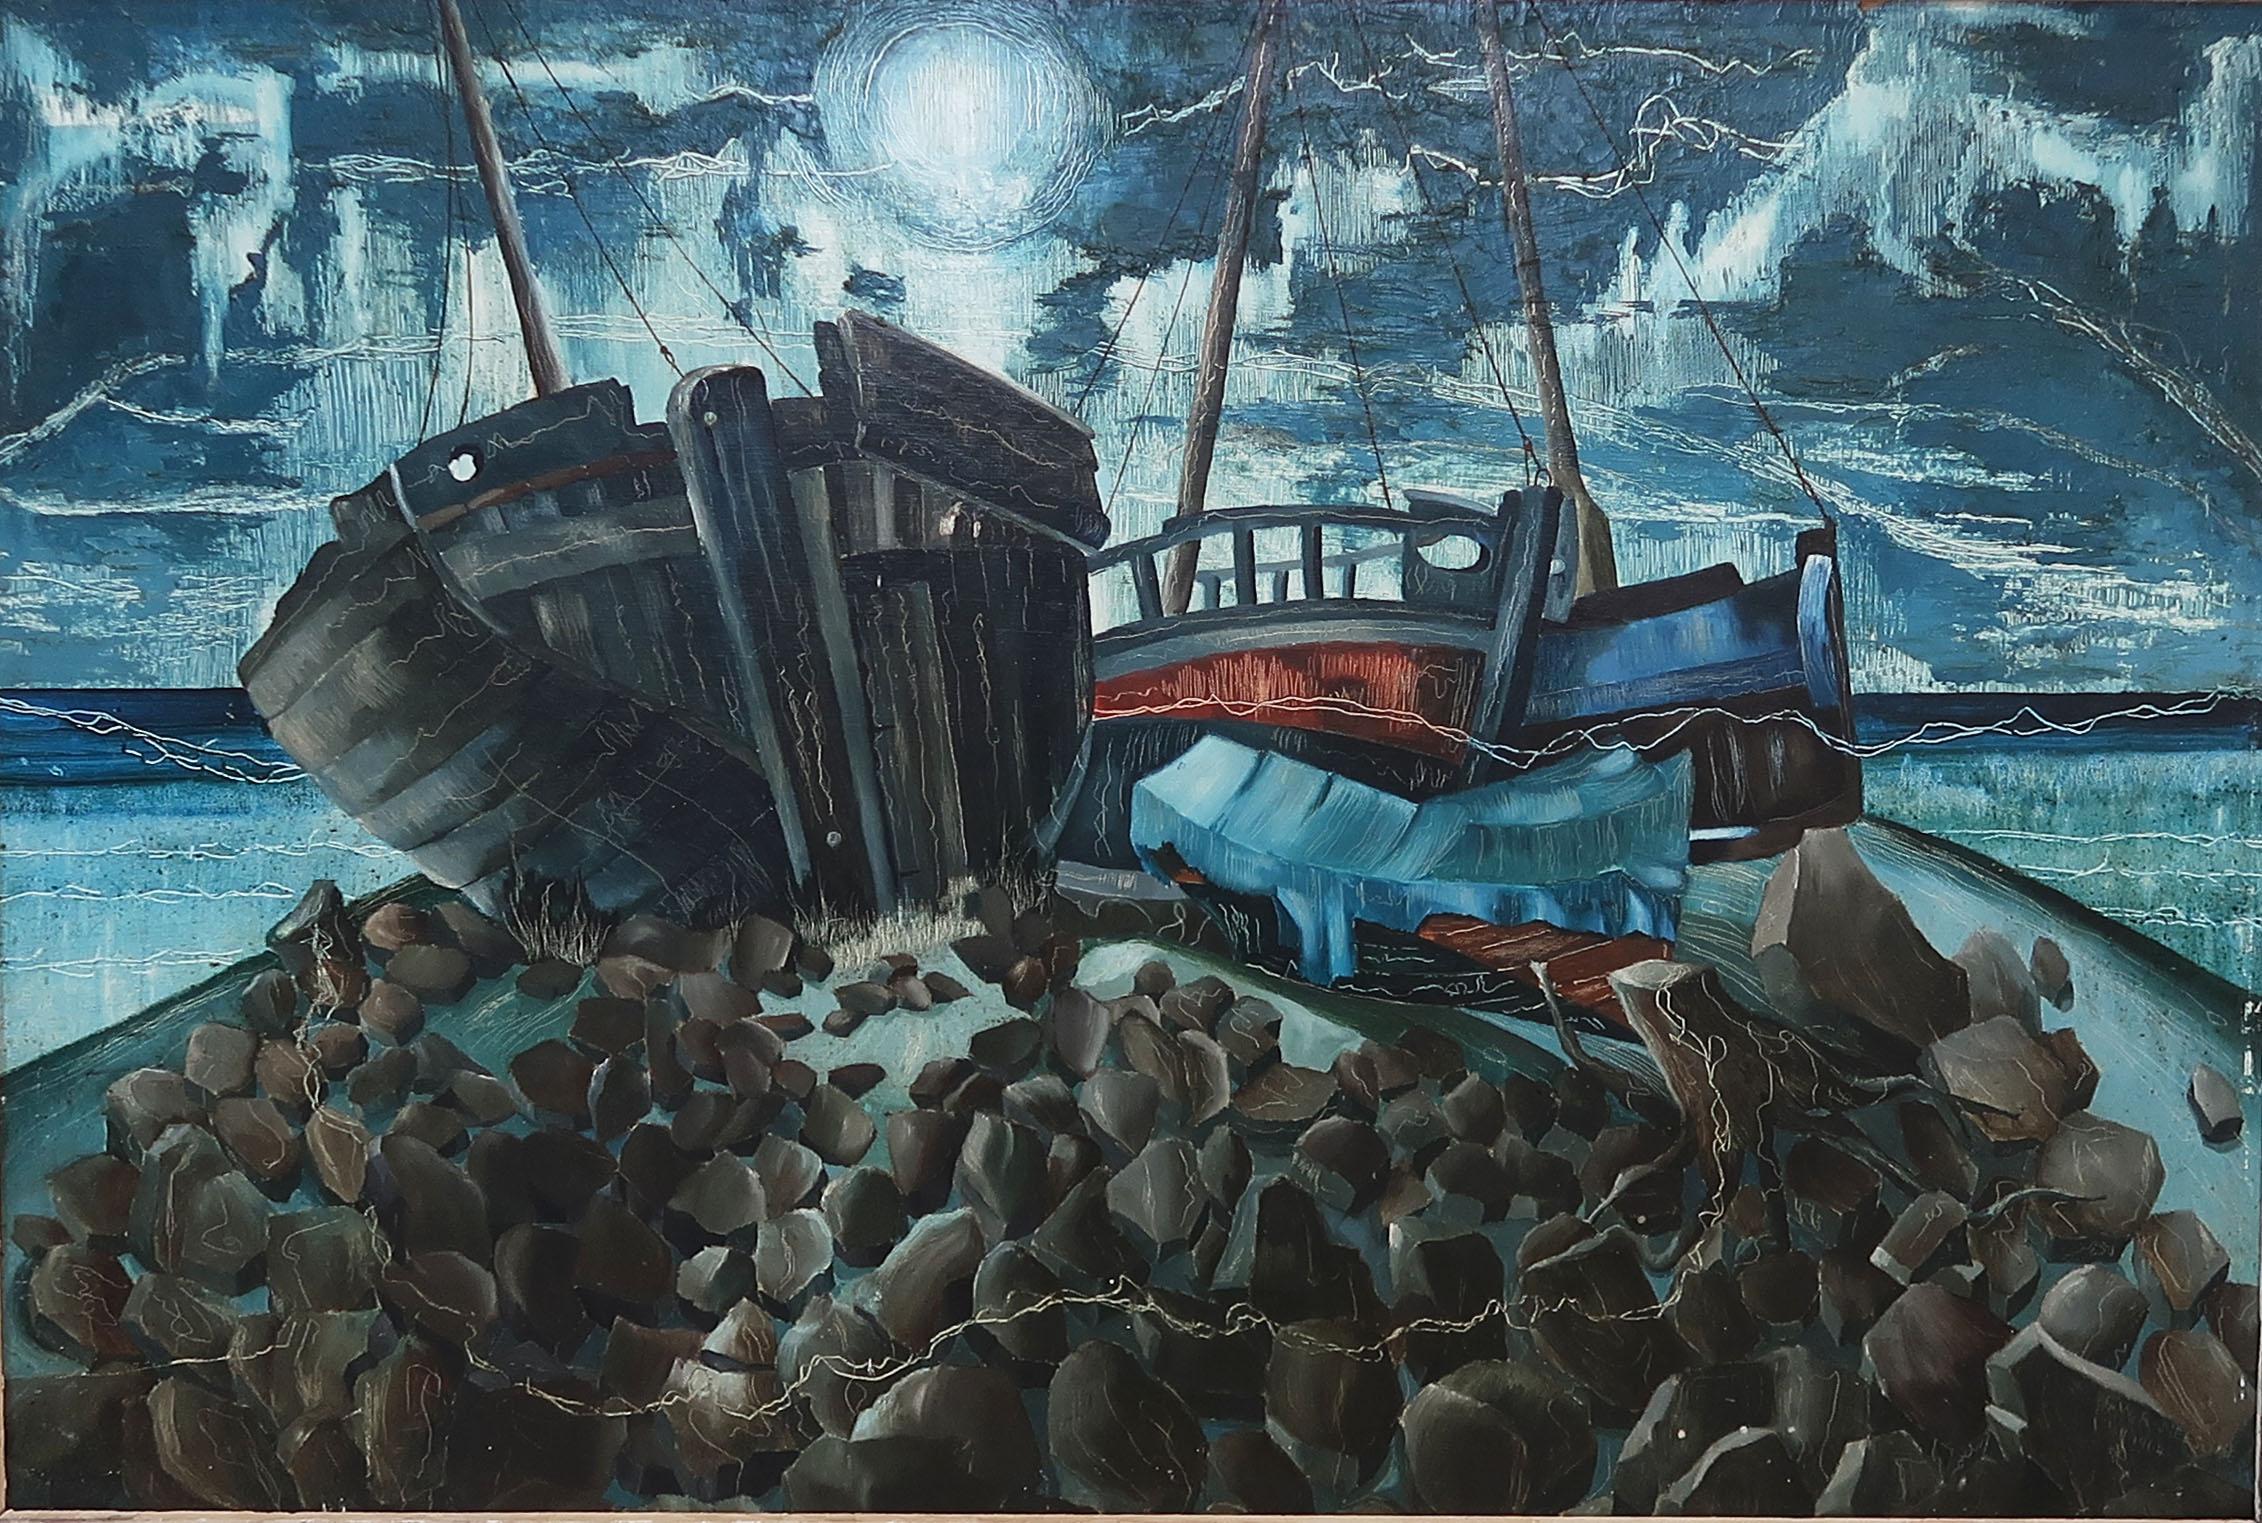 Wonderful painting of boats on a rocky shore. Very much in the style of Paul Nash.

Great colors and technique. I particularly like the way the artist has scratched the paint surface to reveal an amazing striated effect.

Signed and dated bottom